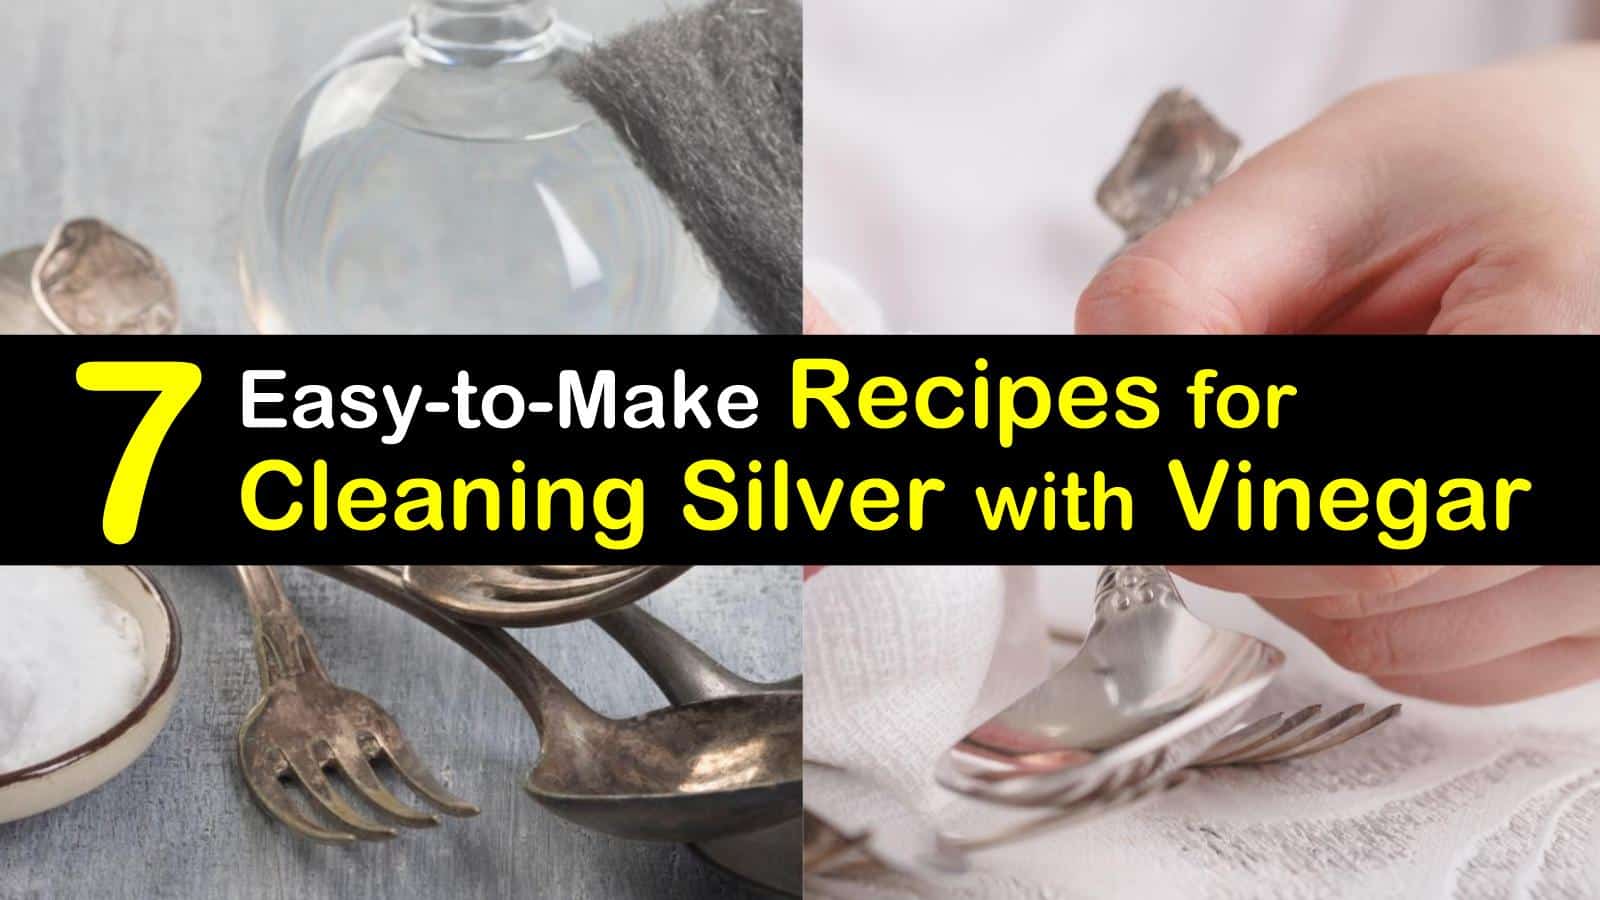 20 Easy-to-Make Recipes to Clean Silver with Vinegar